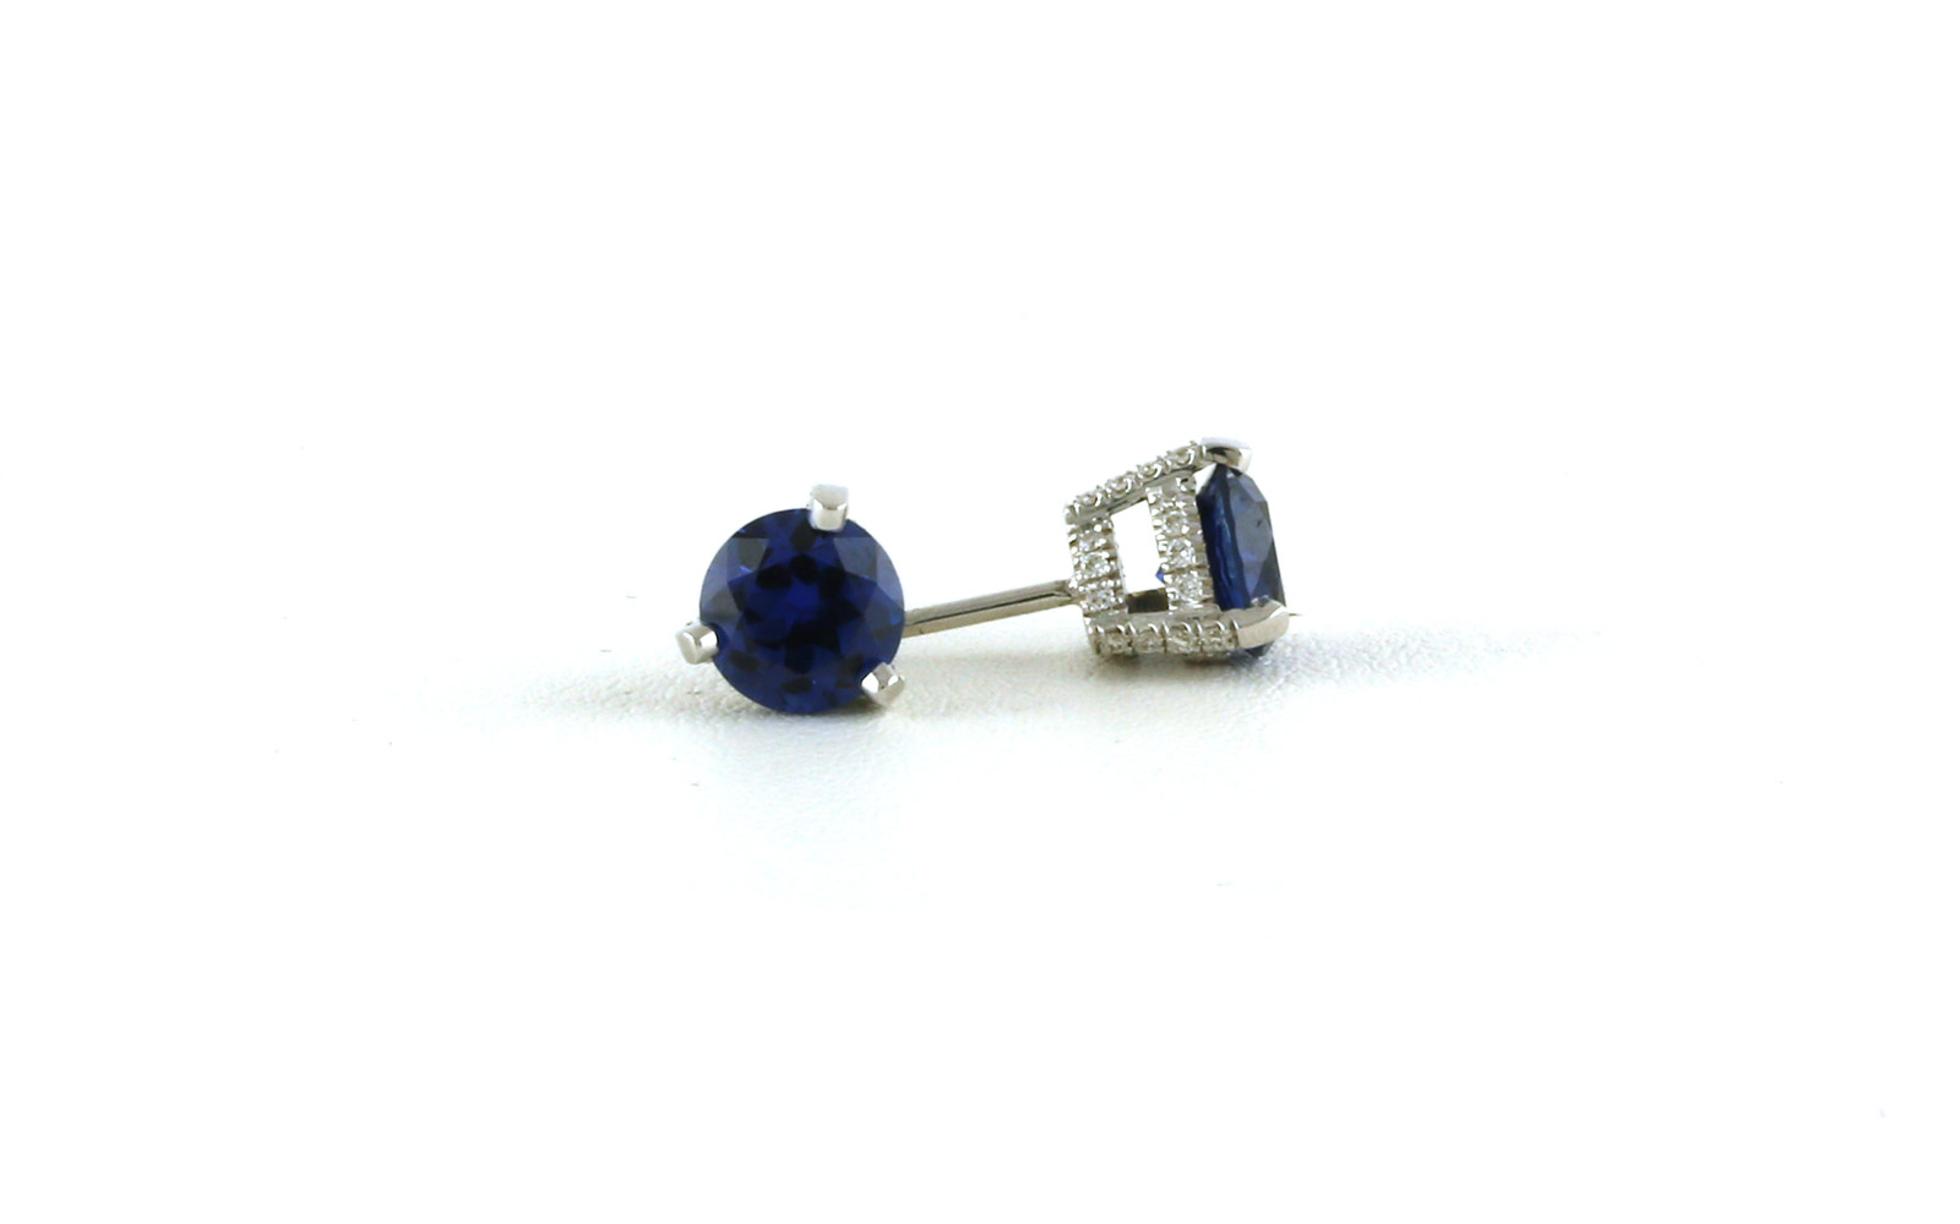 Montana Yogo Sapphire and Diamond Stud Earrings with Pave Diamond 3-Prong Settings in White Gold (2.36cts TWT)